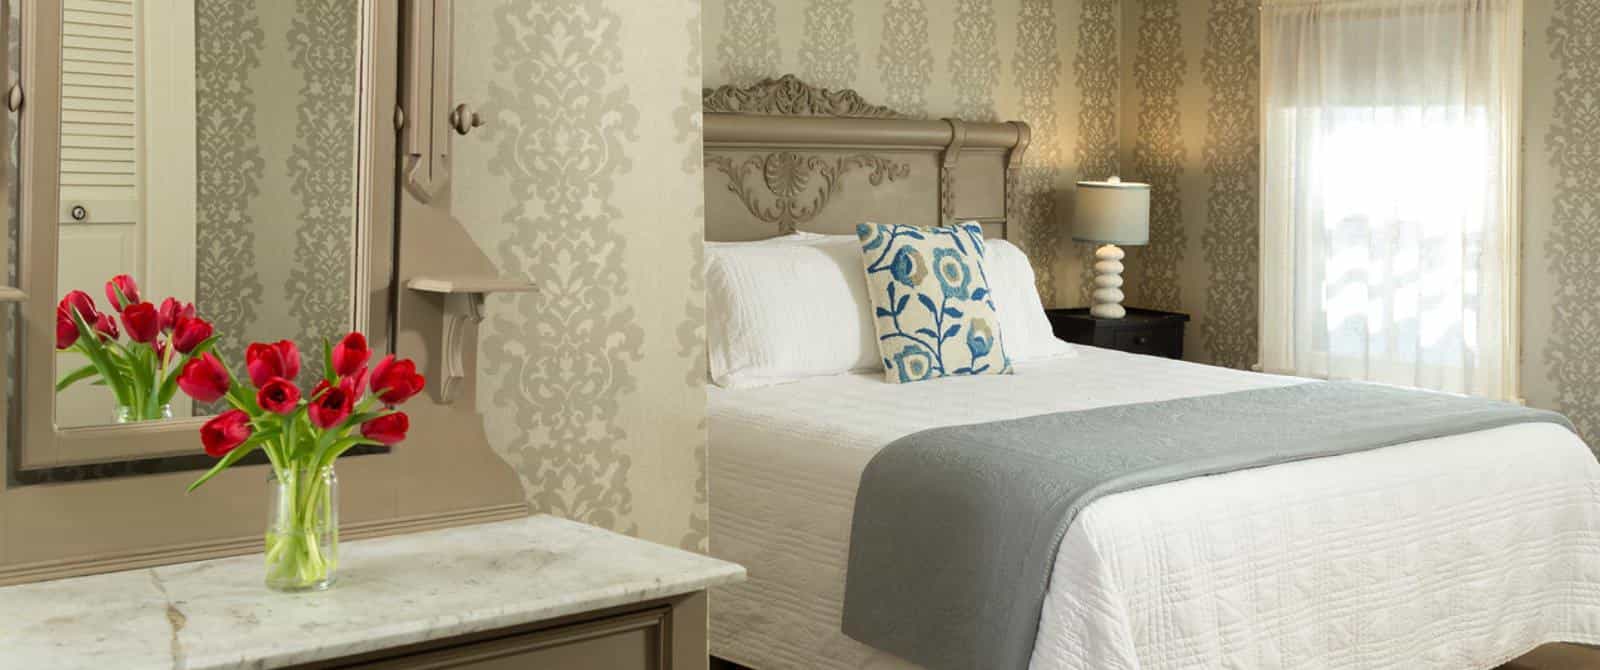 Large bedroom with gray wooden ornate headboard, matching dresser with marble top and mirror, white bedding, hardwood flooring, and brocade wallpaper